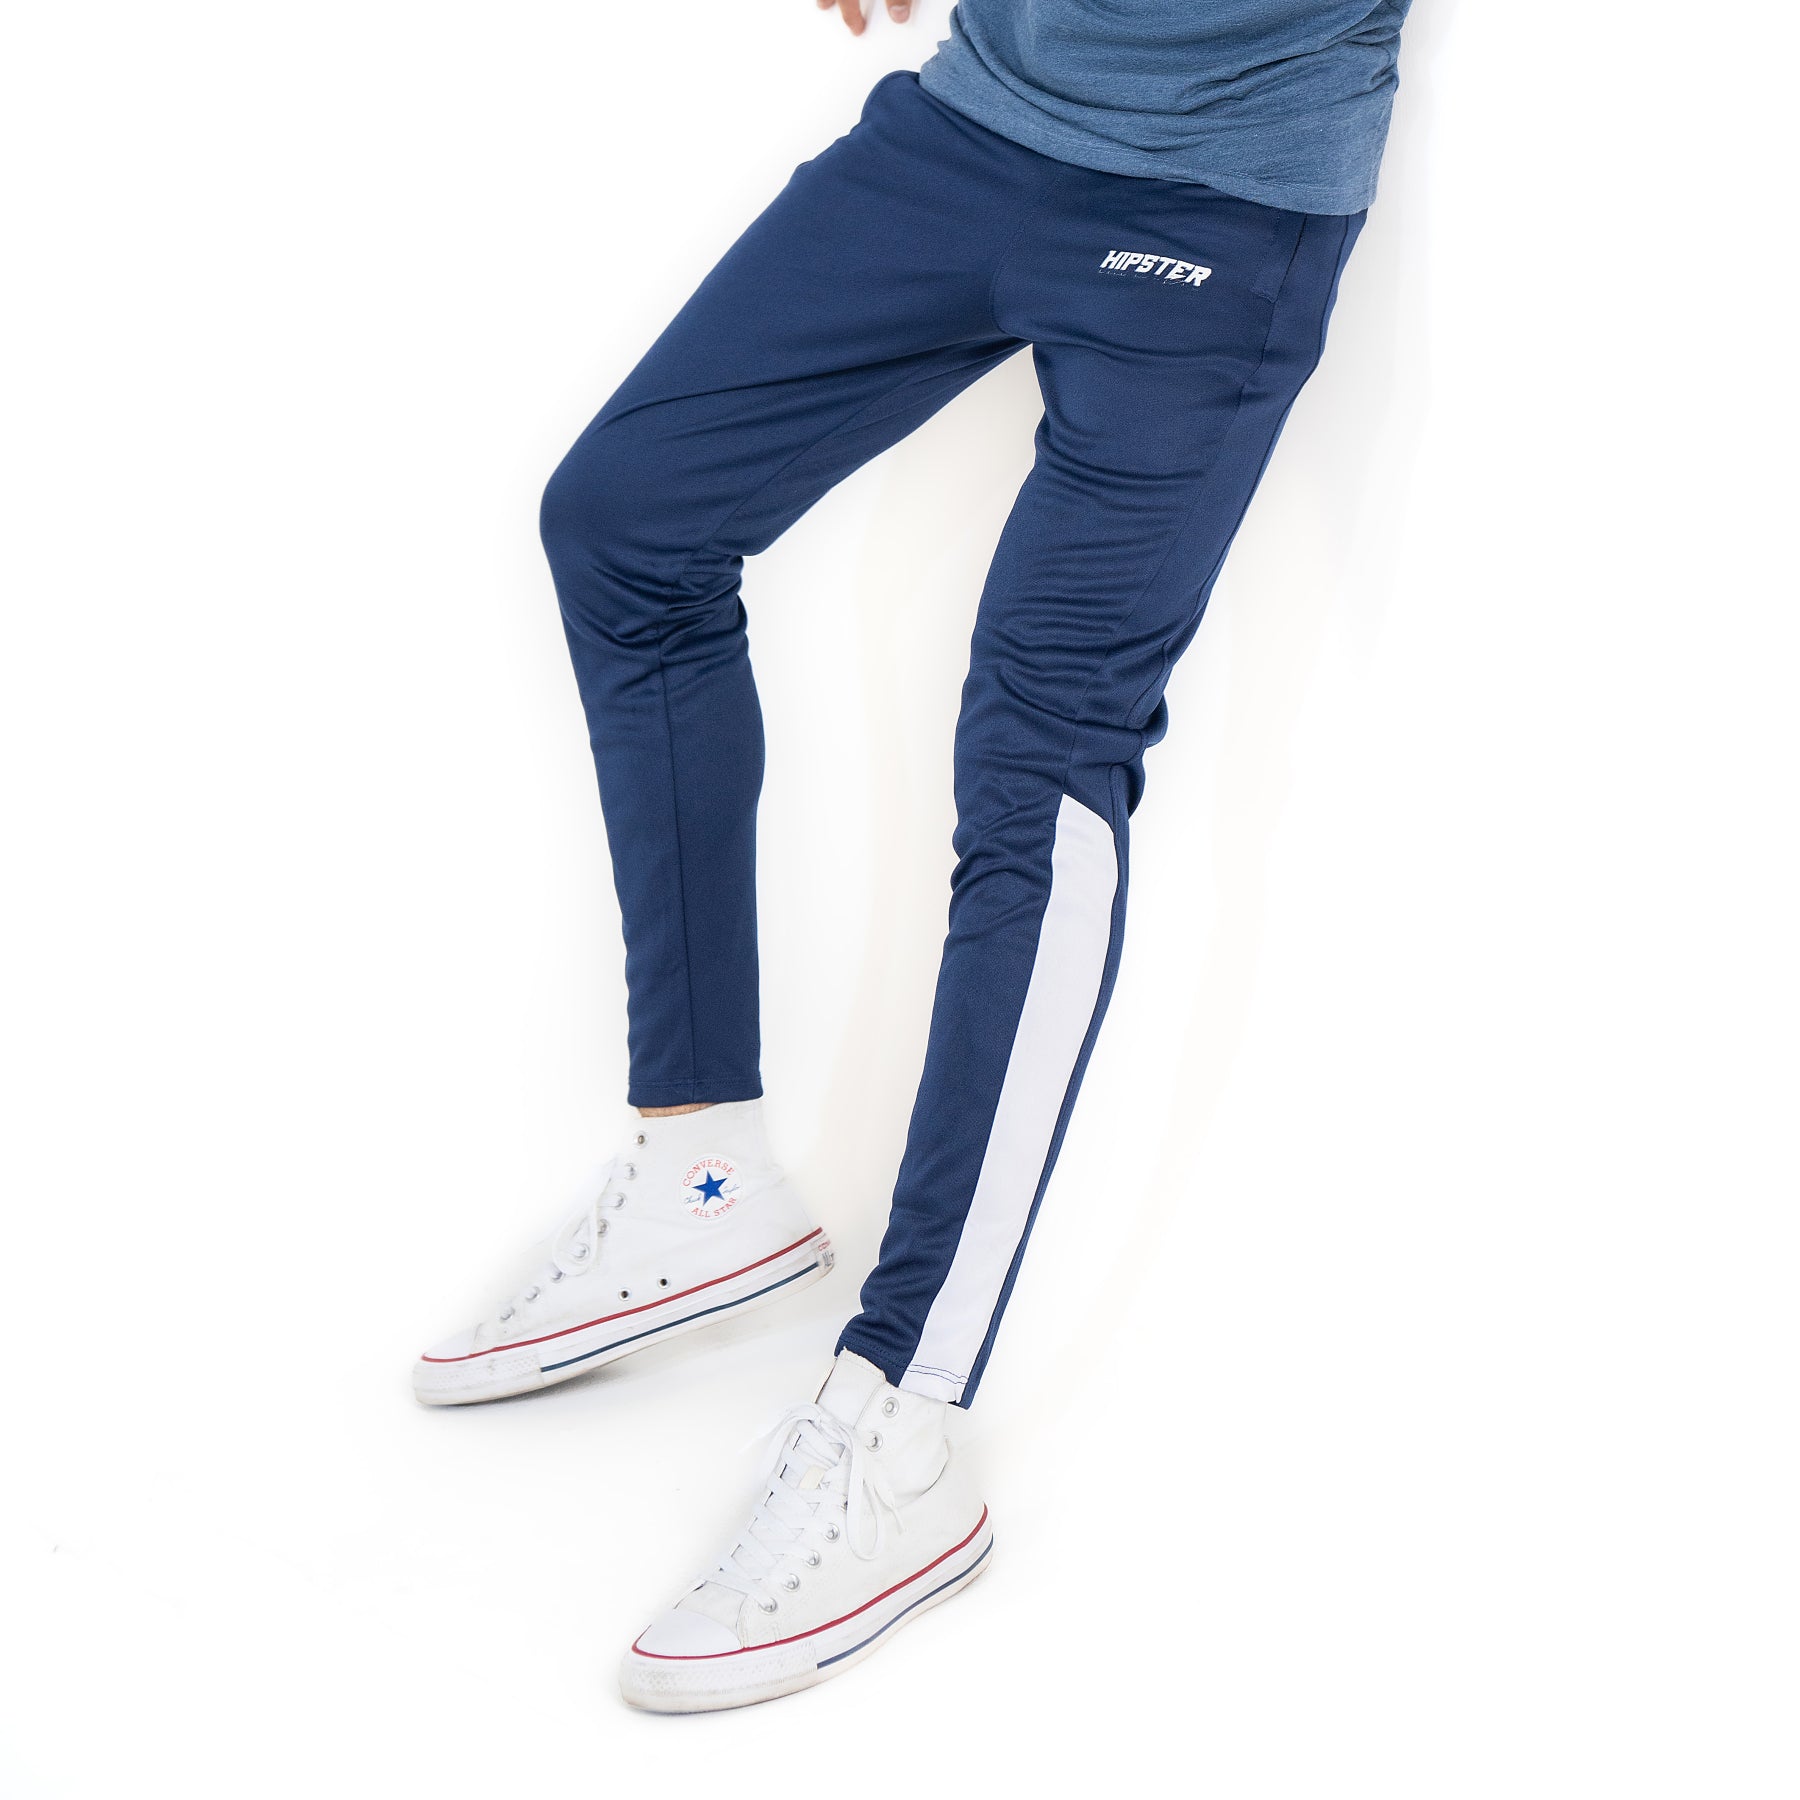 NAVY BLUE WITH WHITE PANEL TROUSER